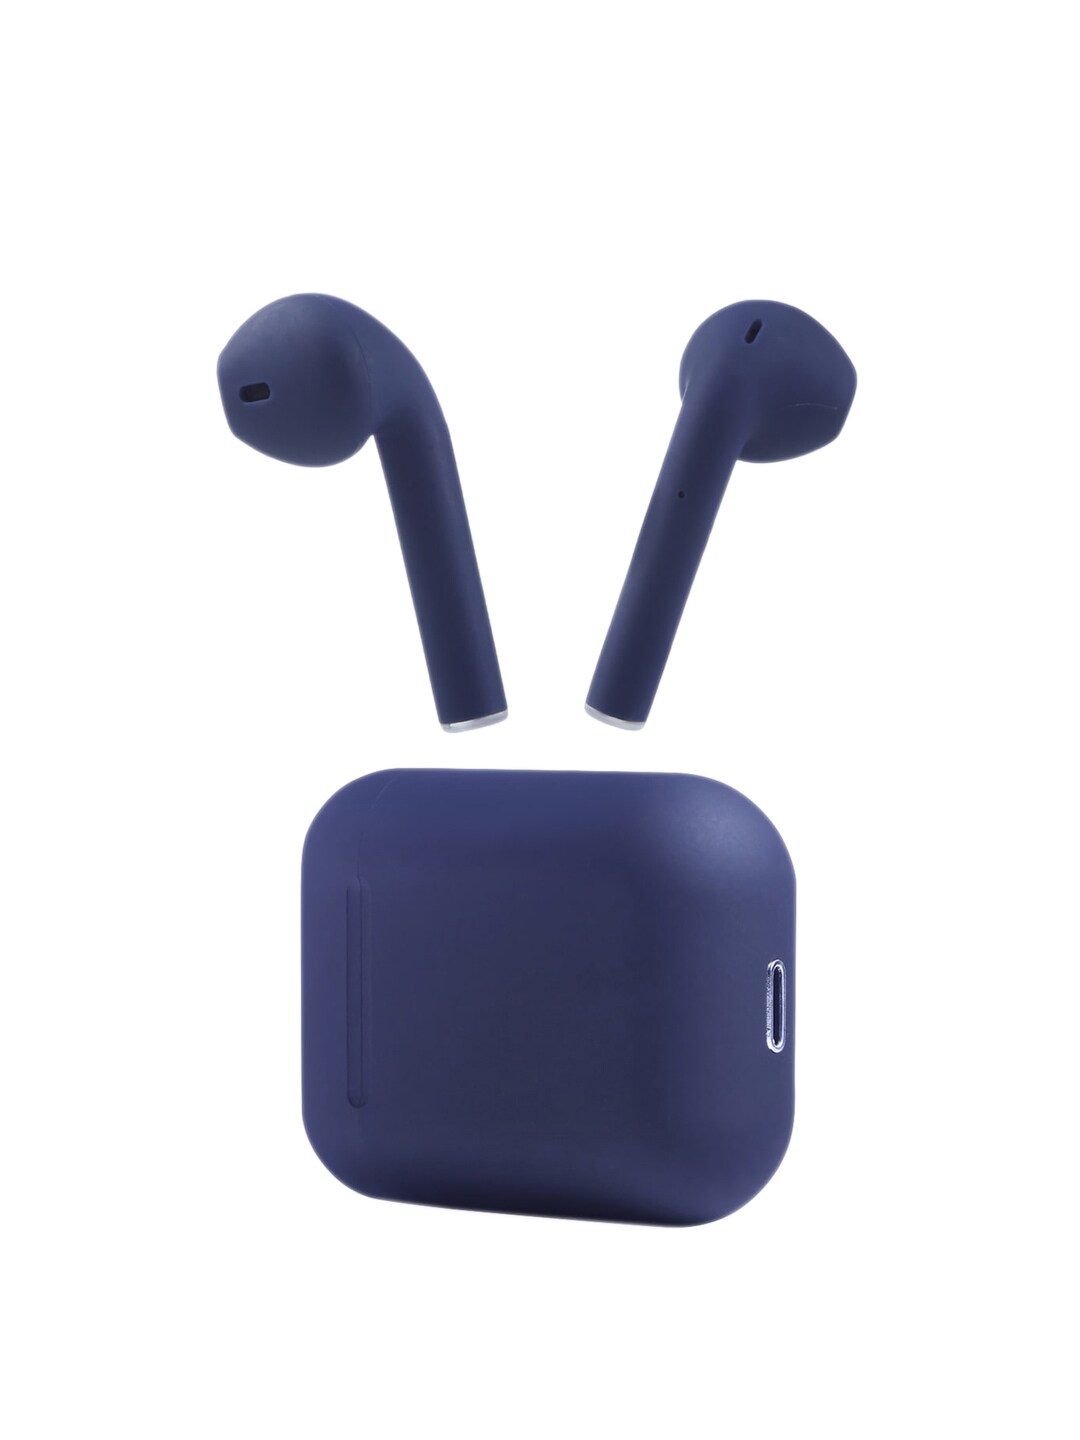 SWAGME Blue Wireless Earbuds With High Bass Price in India